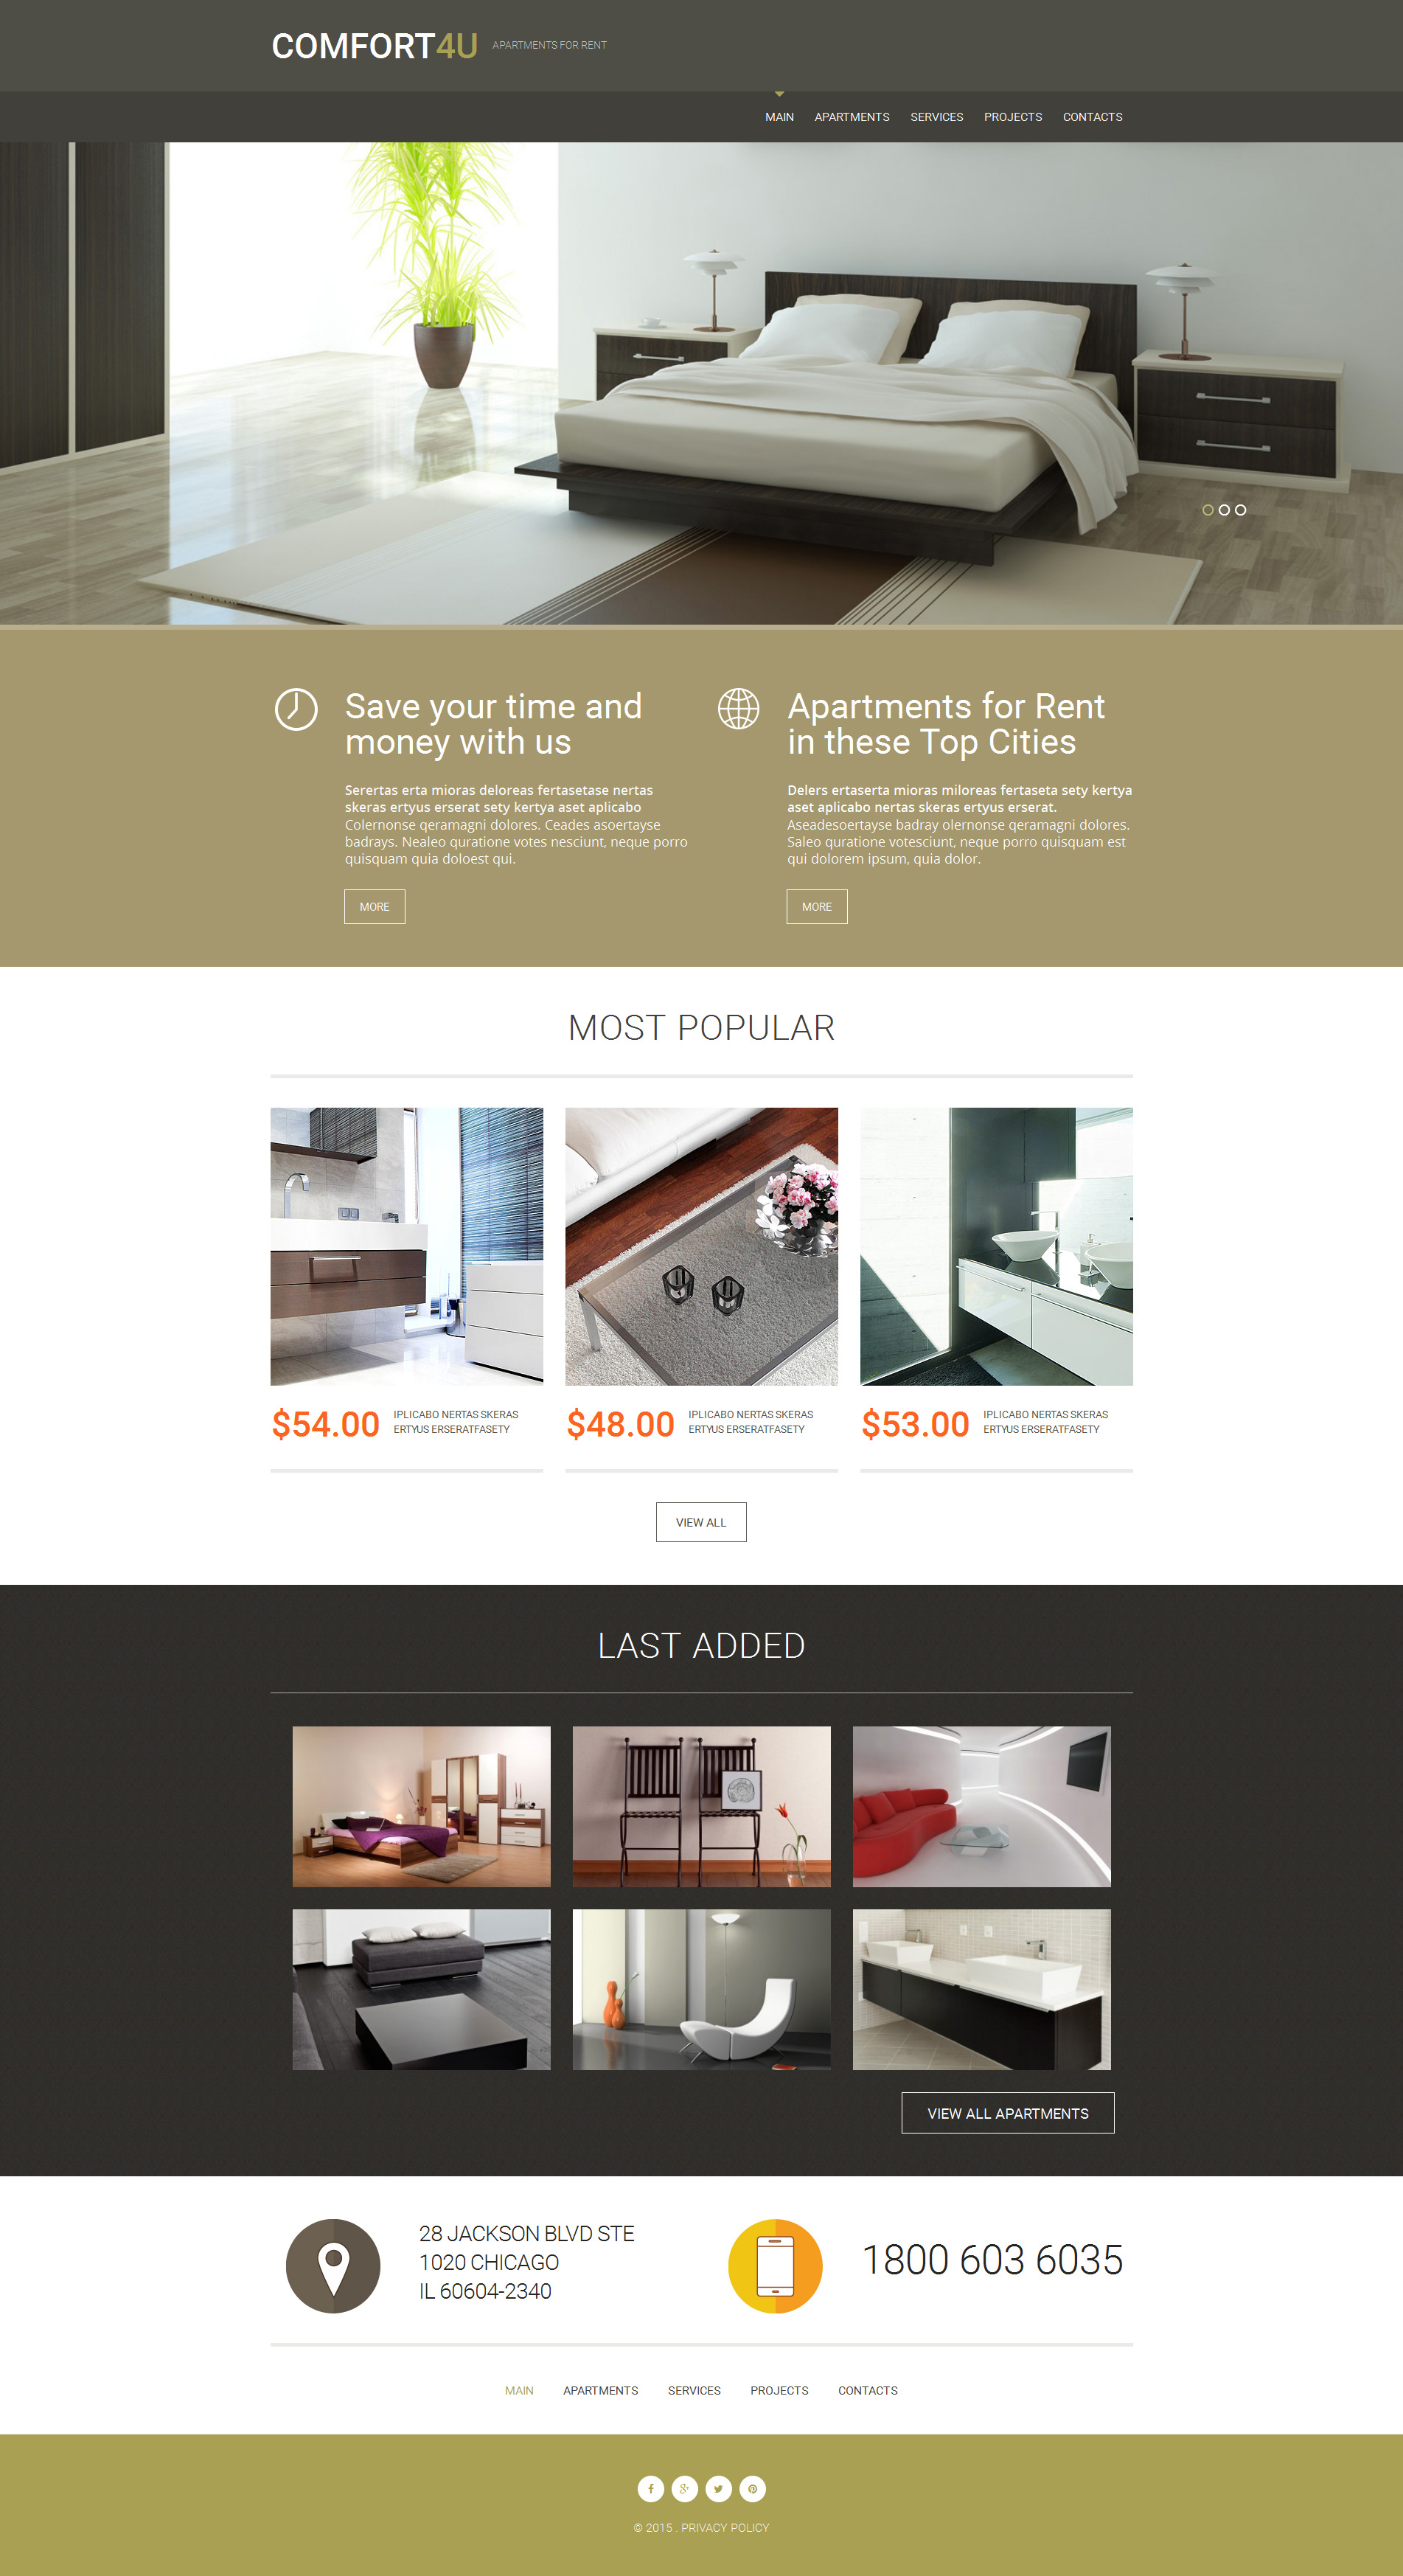 Real Estate Agency Responsive Moto CMS 3 Template